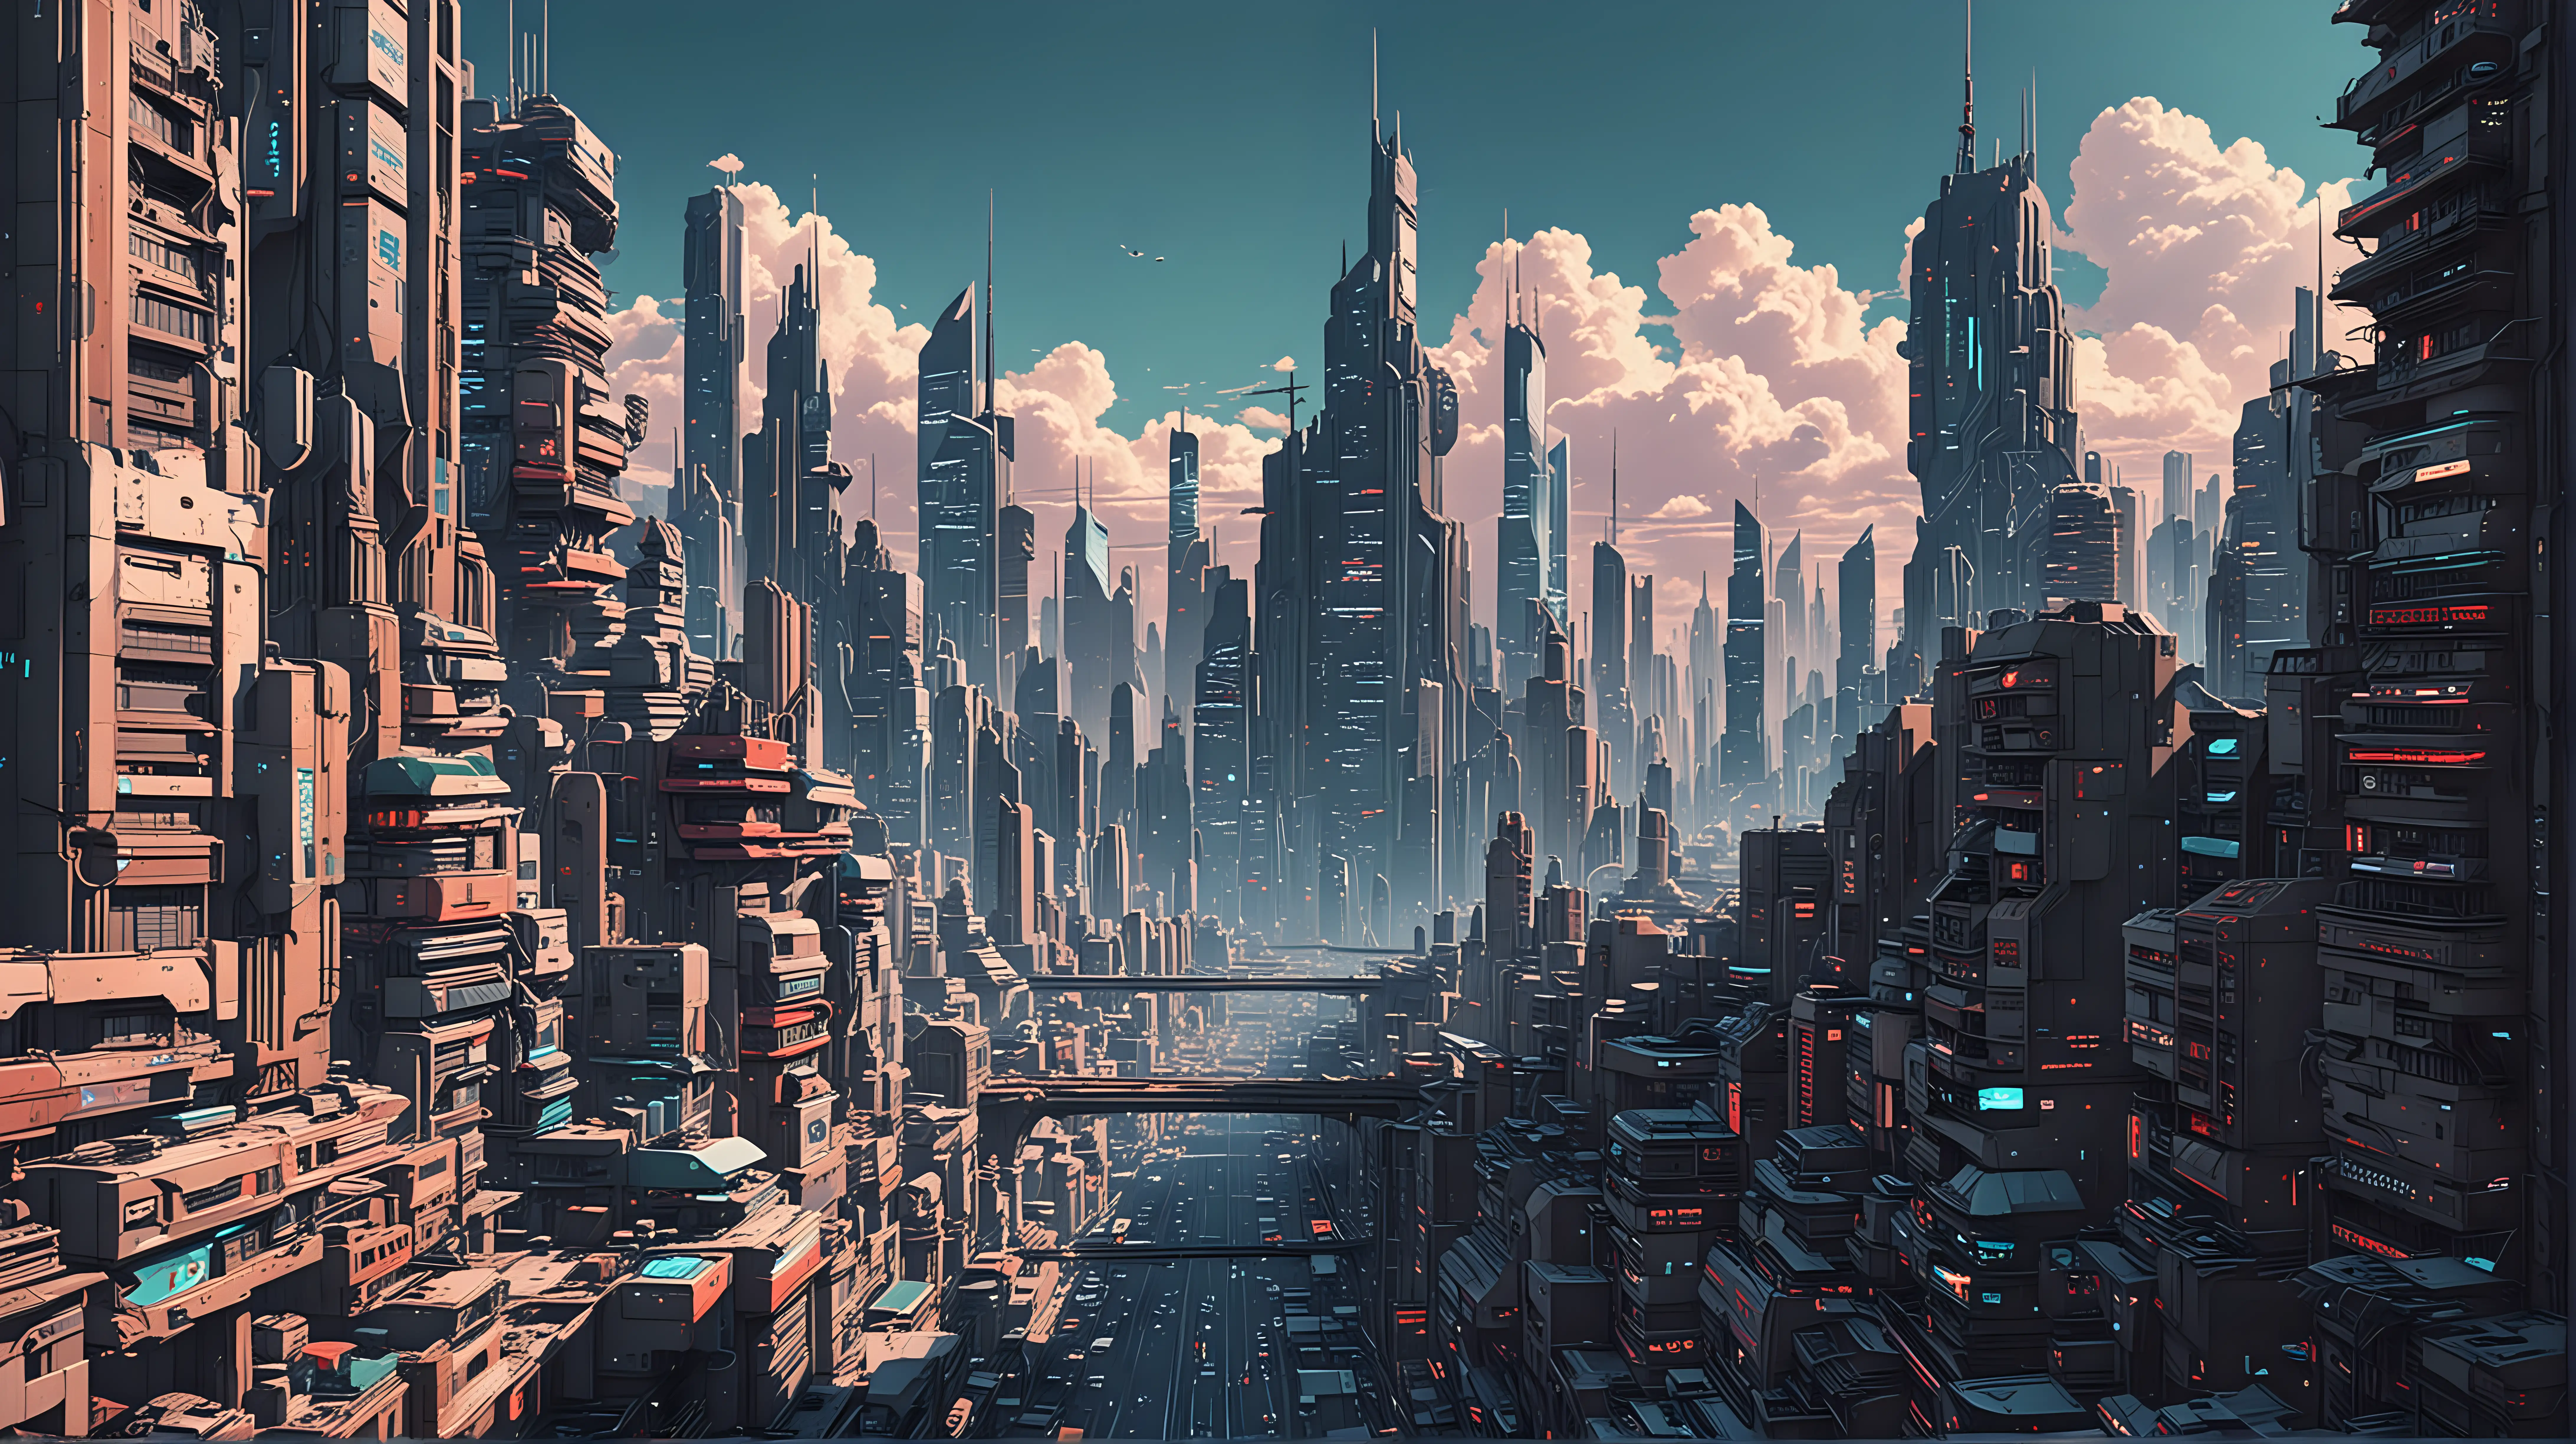 Futuristic Cityscape in 90s Anime Style Cyberpunk Metropolis with Neon Lights and Retro Vibes